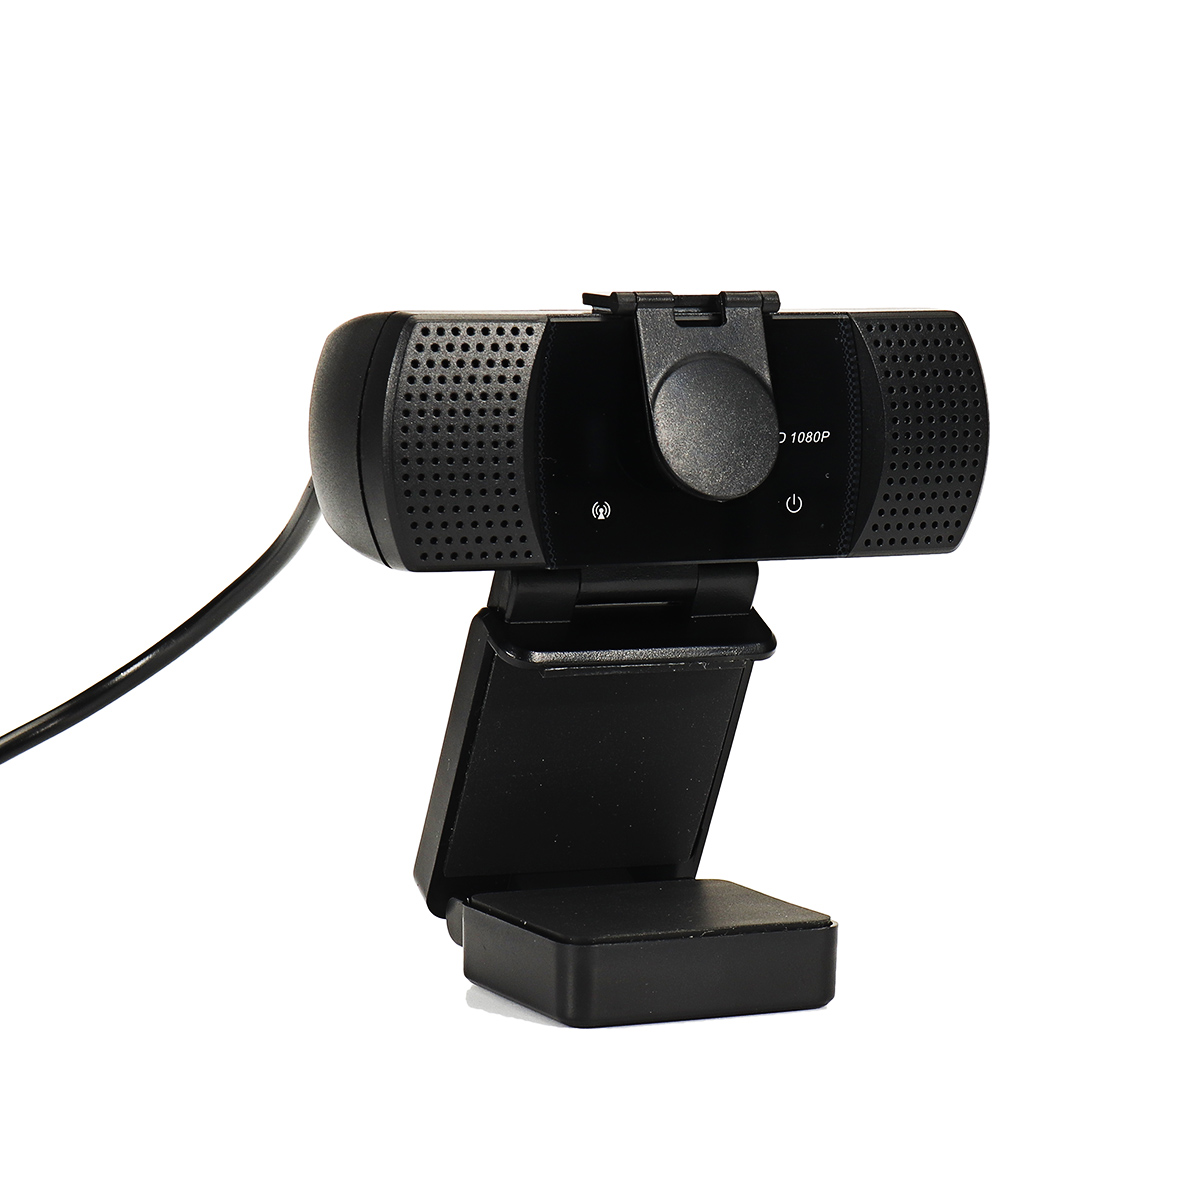 Find 1080P USB Webcams PC Laptop Video Computer Camera Built in Microphone Drive Free for Sale on Gipsybee.com with cryptocurrencies